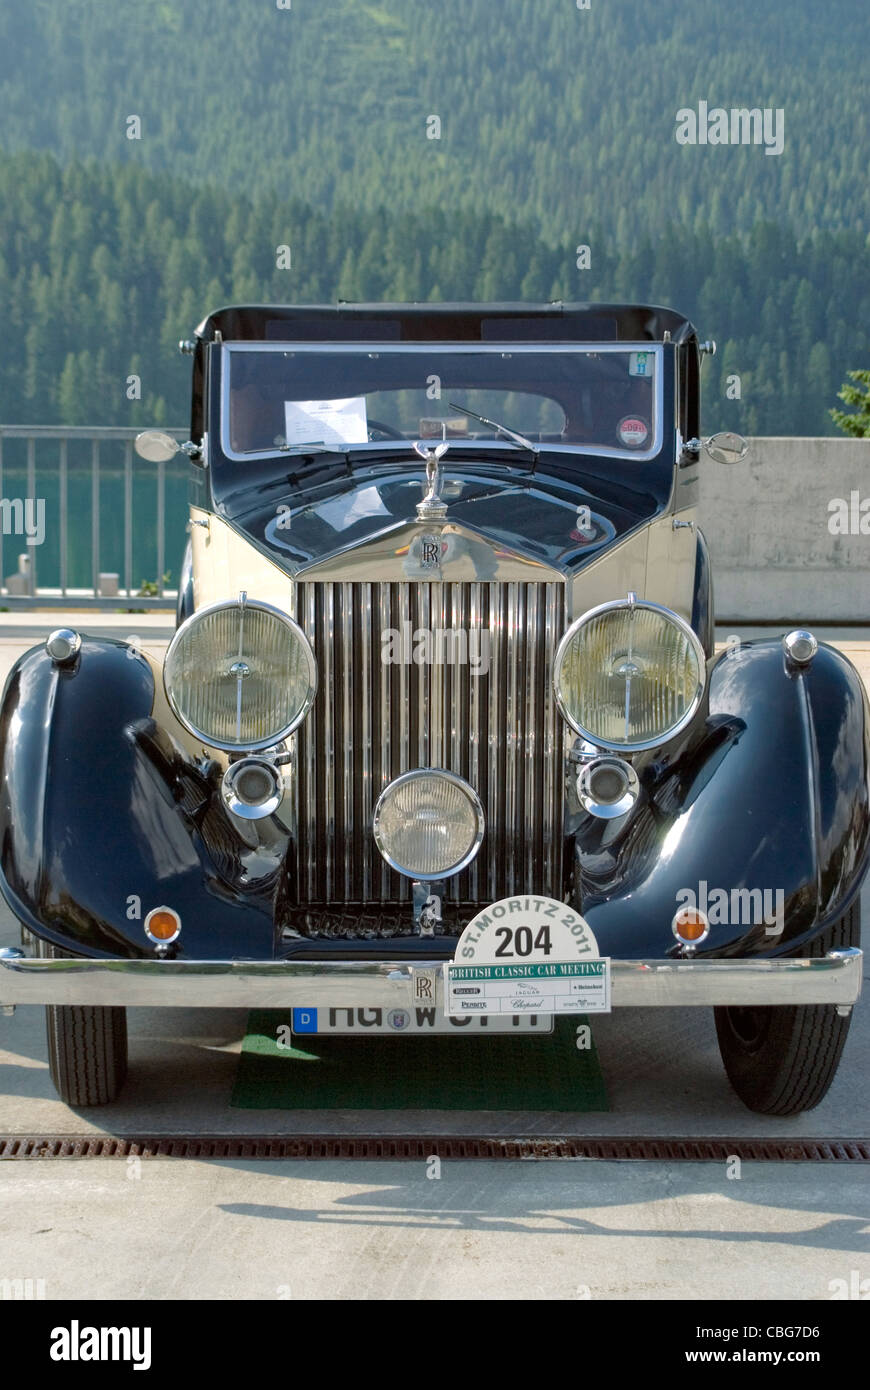 Rolls Royce Switzerland High Resolution Stock Photography and Images - Alamy